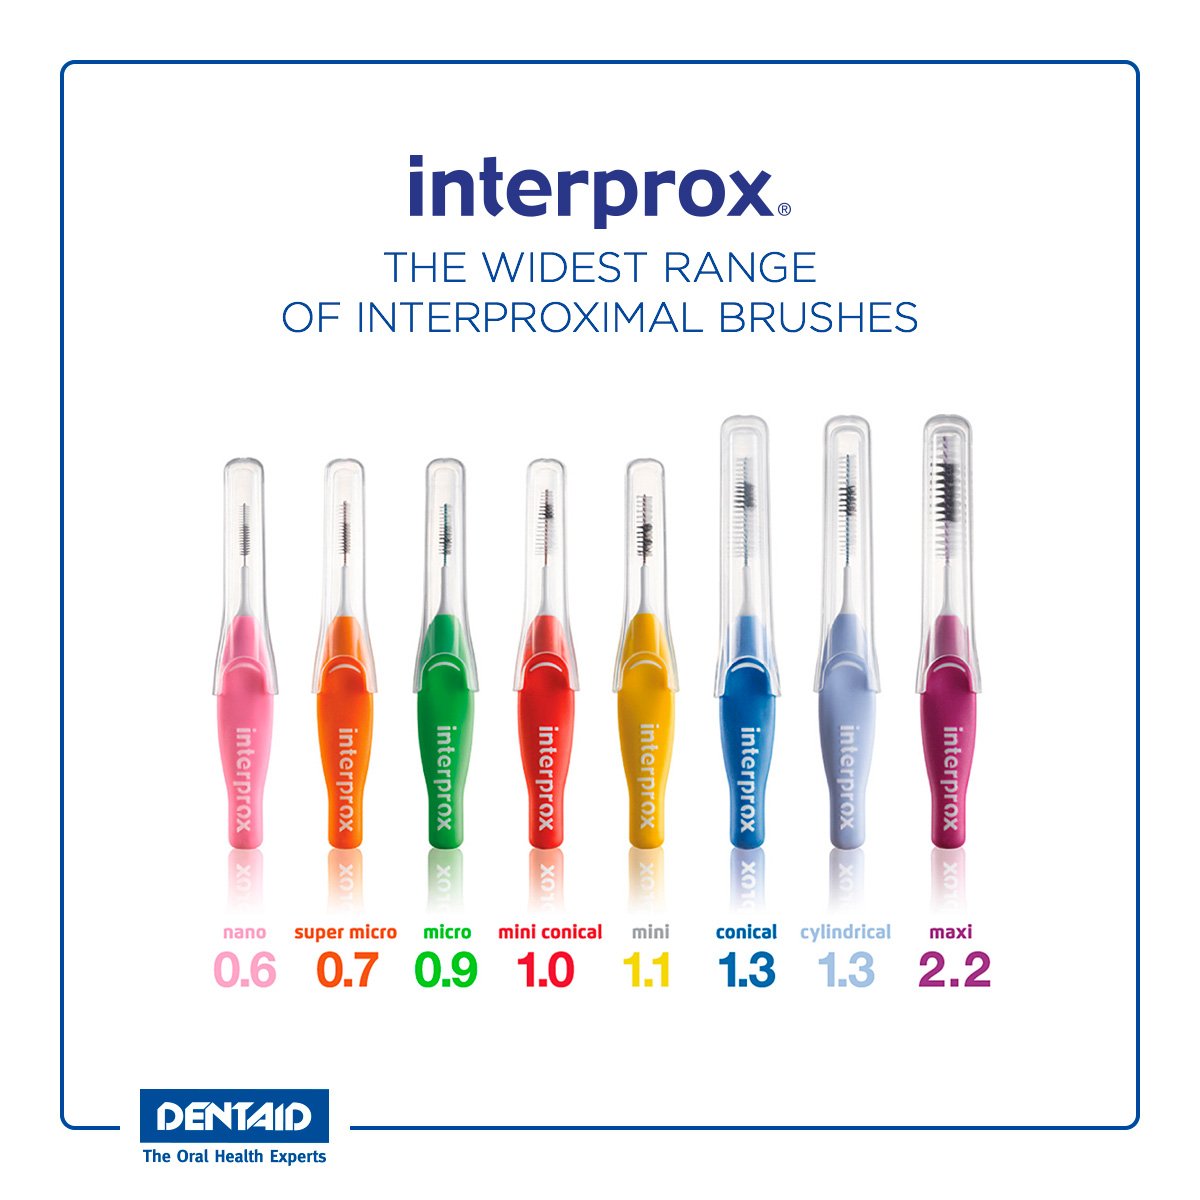 de sneeuw distillatie chirurg DENTAID Oral Health Experts on Twitter: "#Interprox offers a broad  selection of interproximal #brush PHDs which indicate the size of the  smallest space into which the brush can be inserted.  https://t.co/BV1HI6B4uW" /